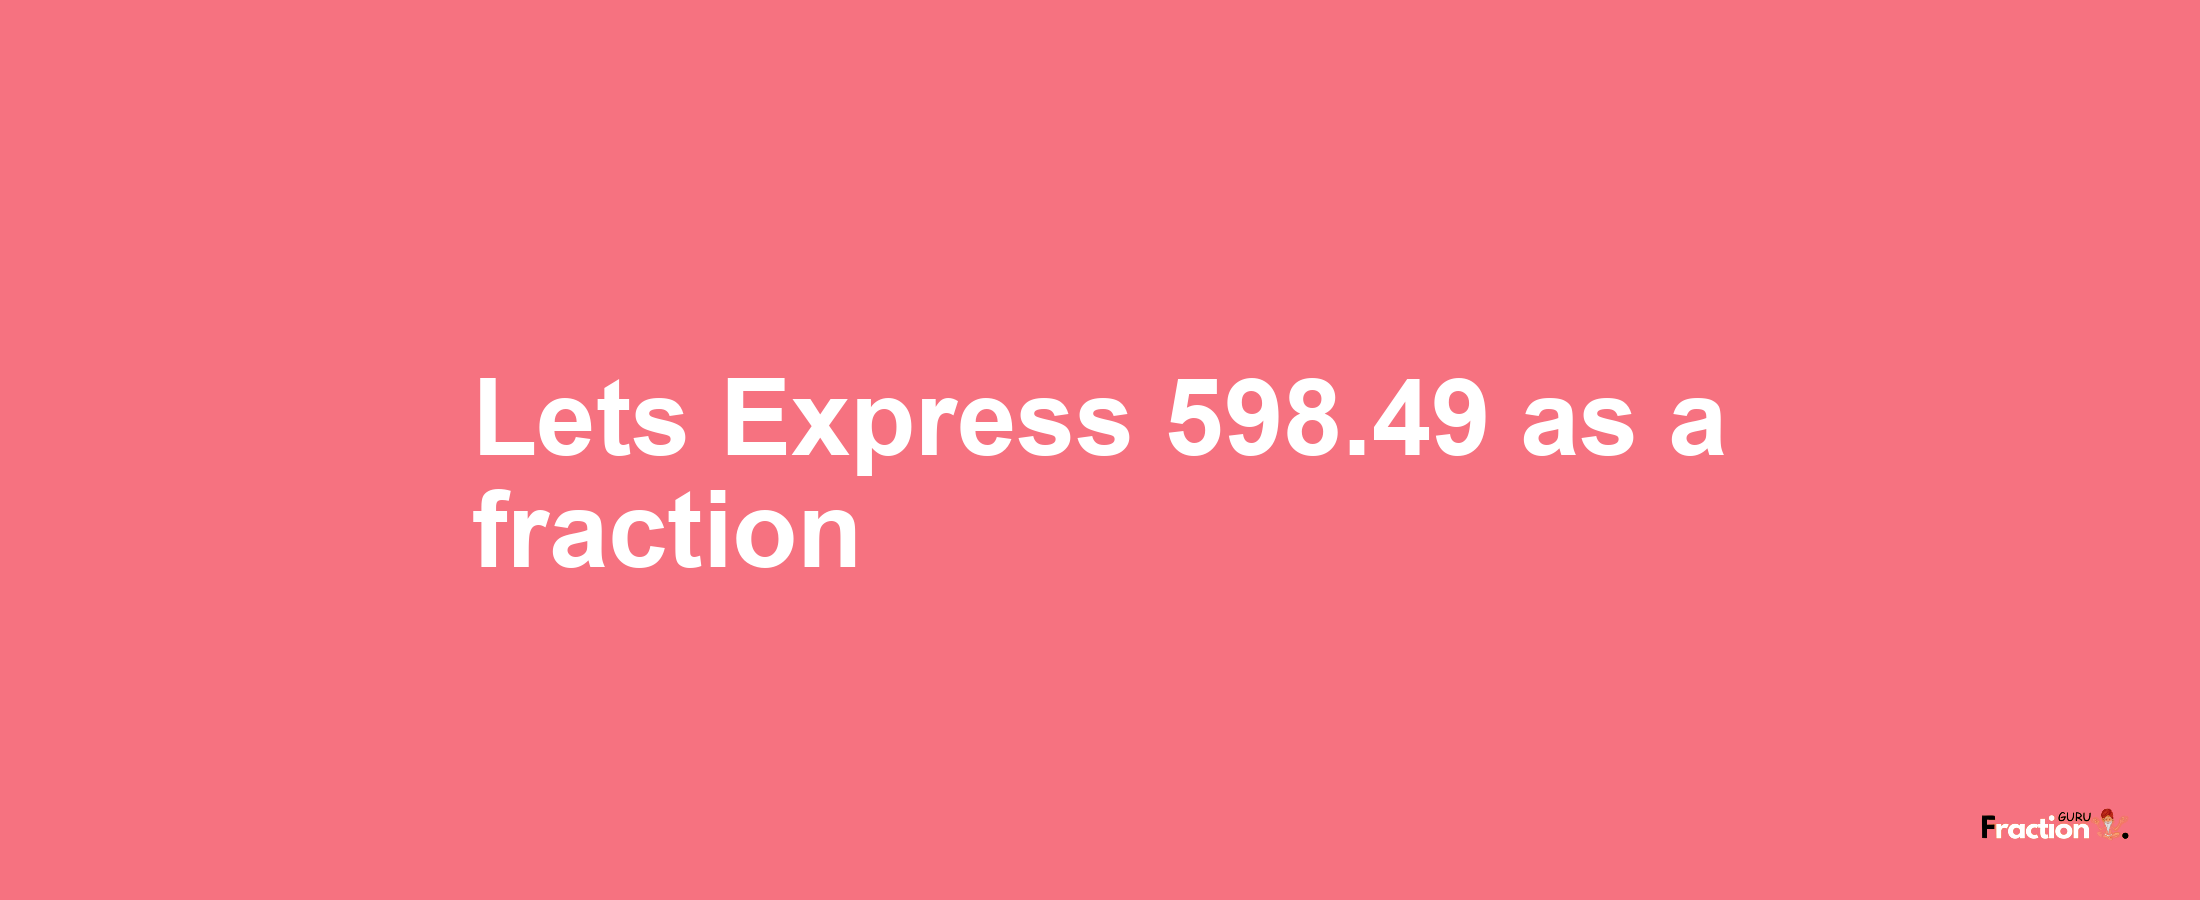 Lets Express 598.49 as afraction